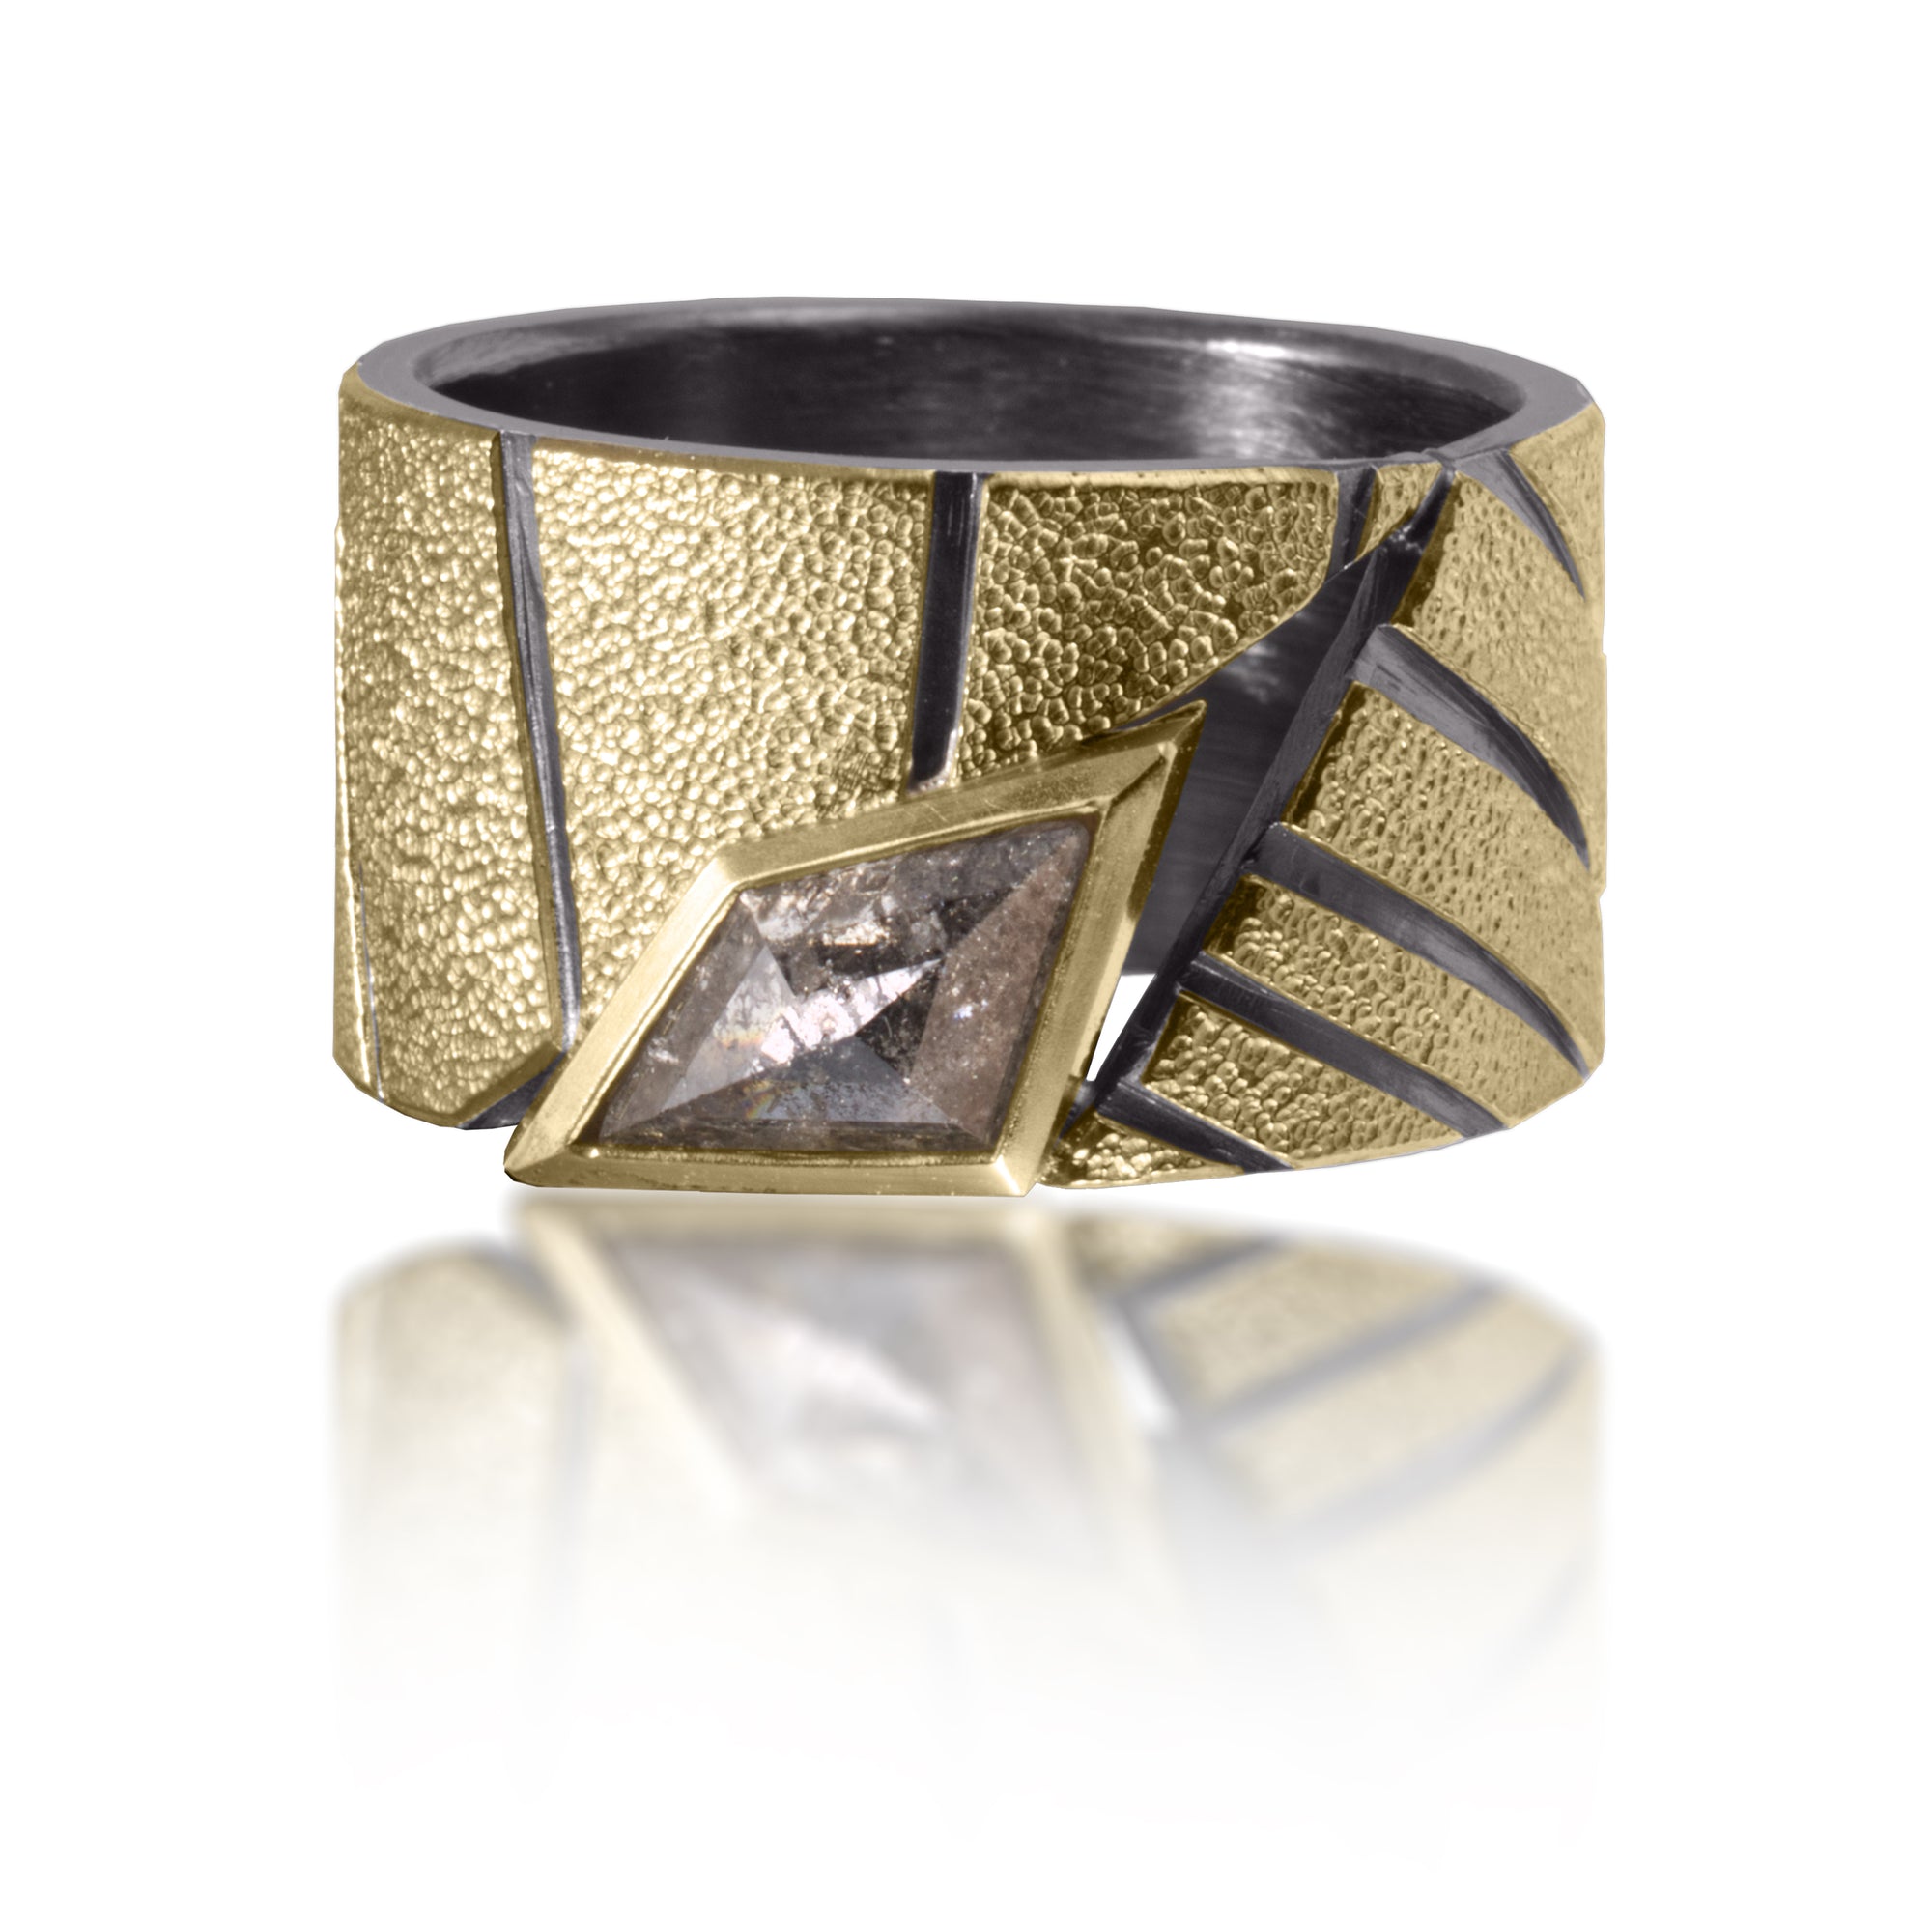 Stripe Ring #9 in 18k gold and oxidized sterling silver with a bezel set, one of a kind, angular, gray rose cut diamond, 0.94 tcw. Hand fabricated, stipple textured and engraved mixed metals. The 14mm wide straight band features graduated, radial stripes, a low profile and very unique diamond.